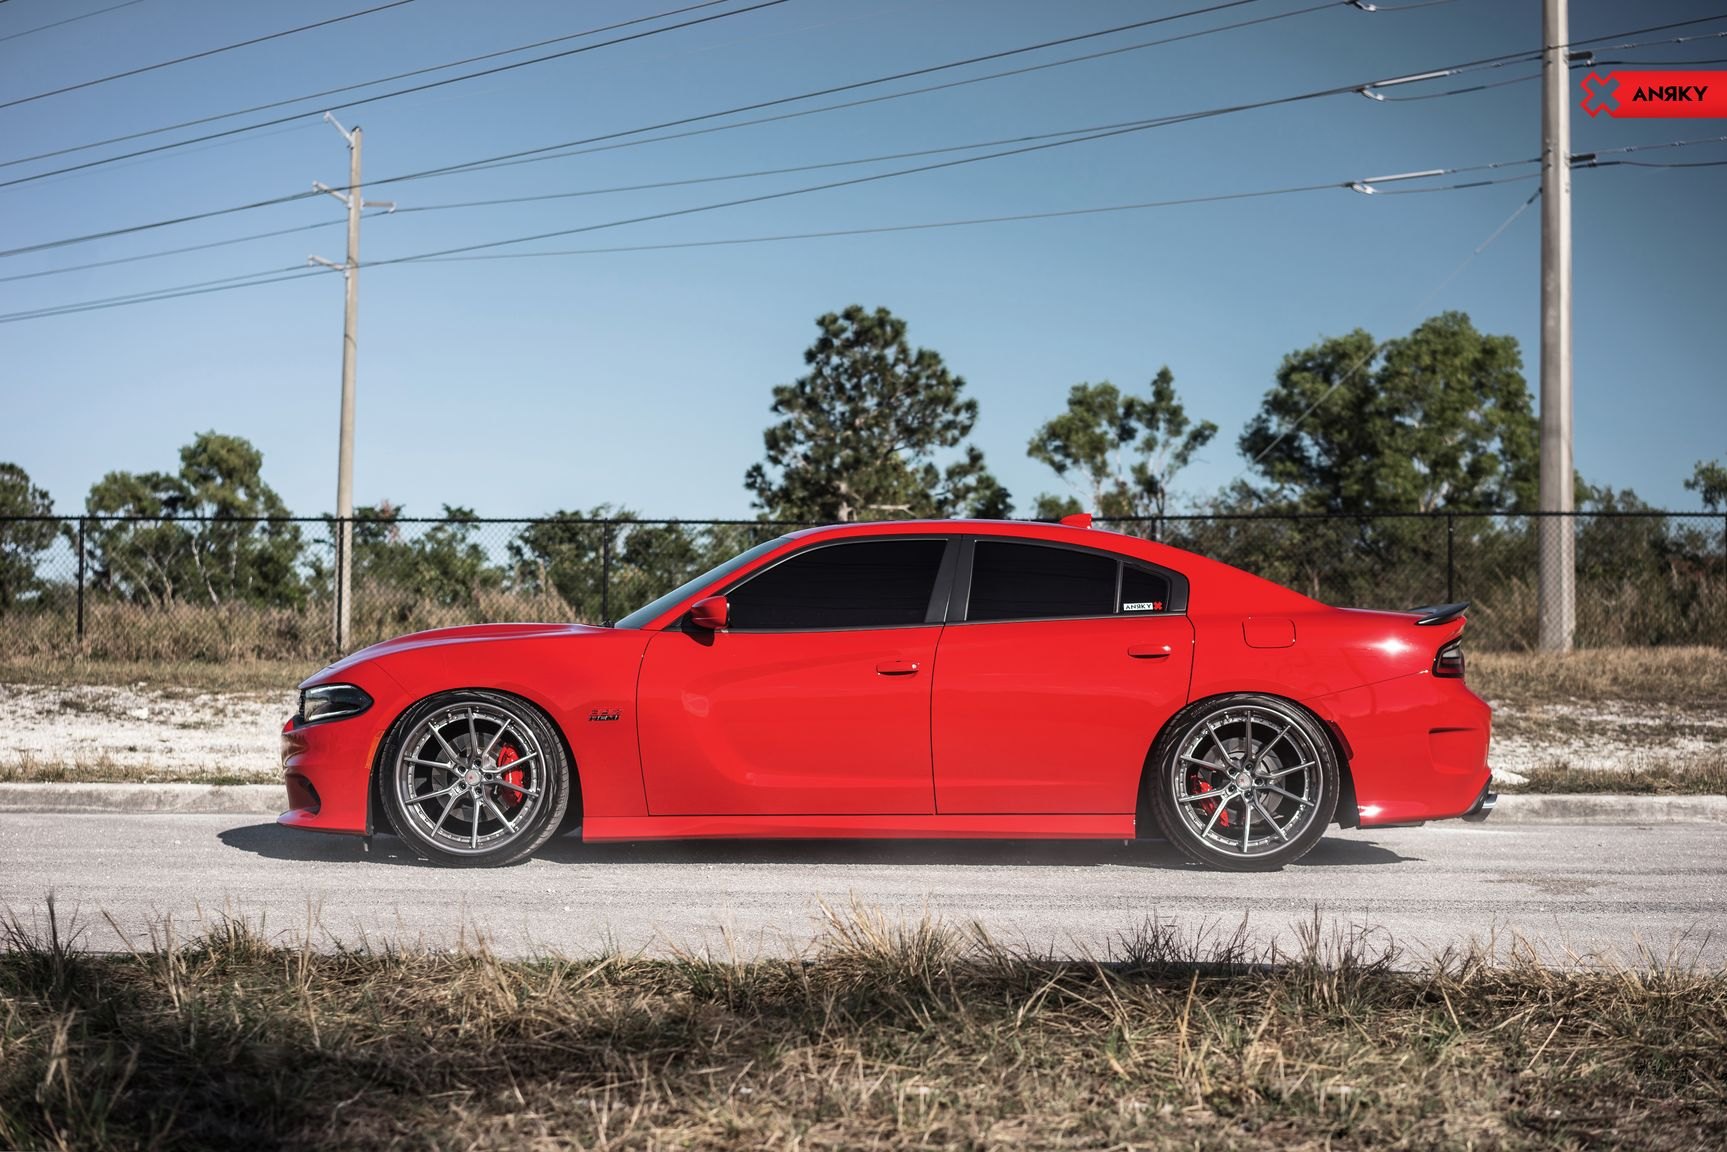 Satin Gunmetal Anrky Wheels on Red Dodge Charger - Photo by Anrky Wheels